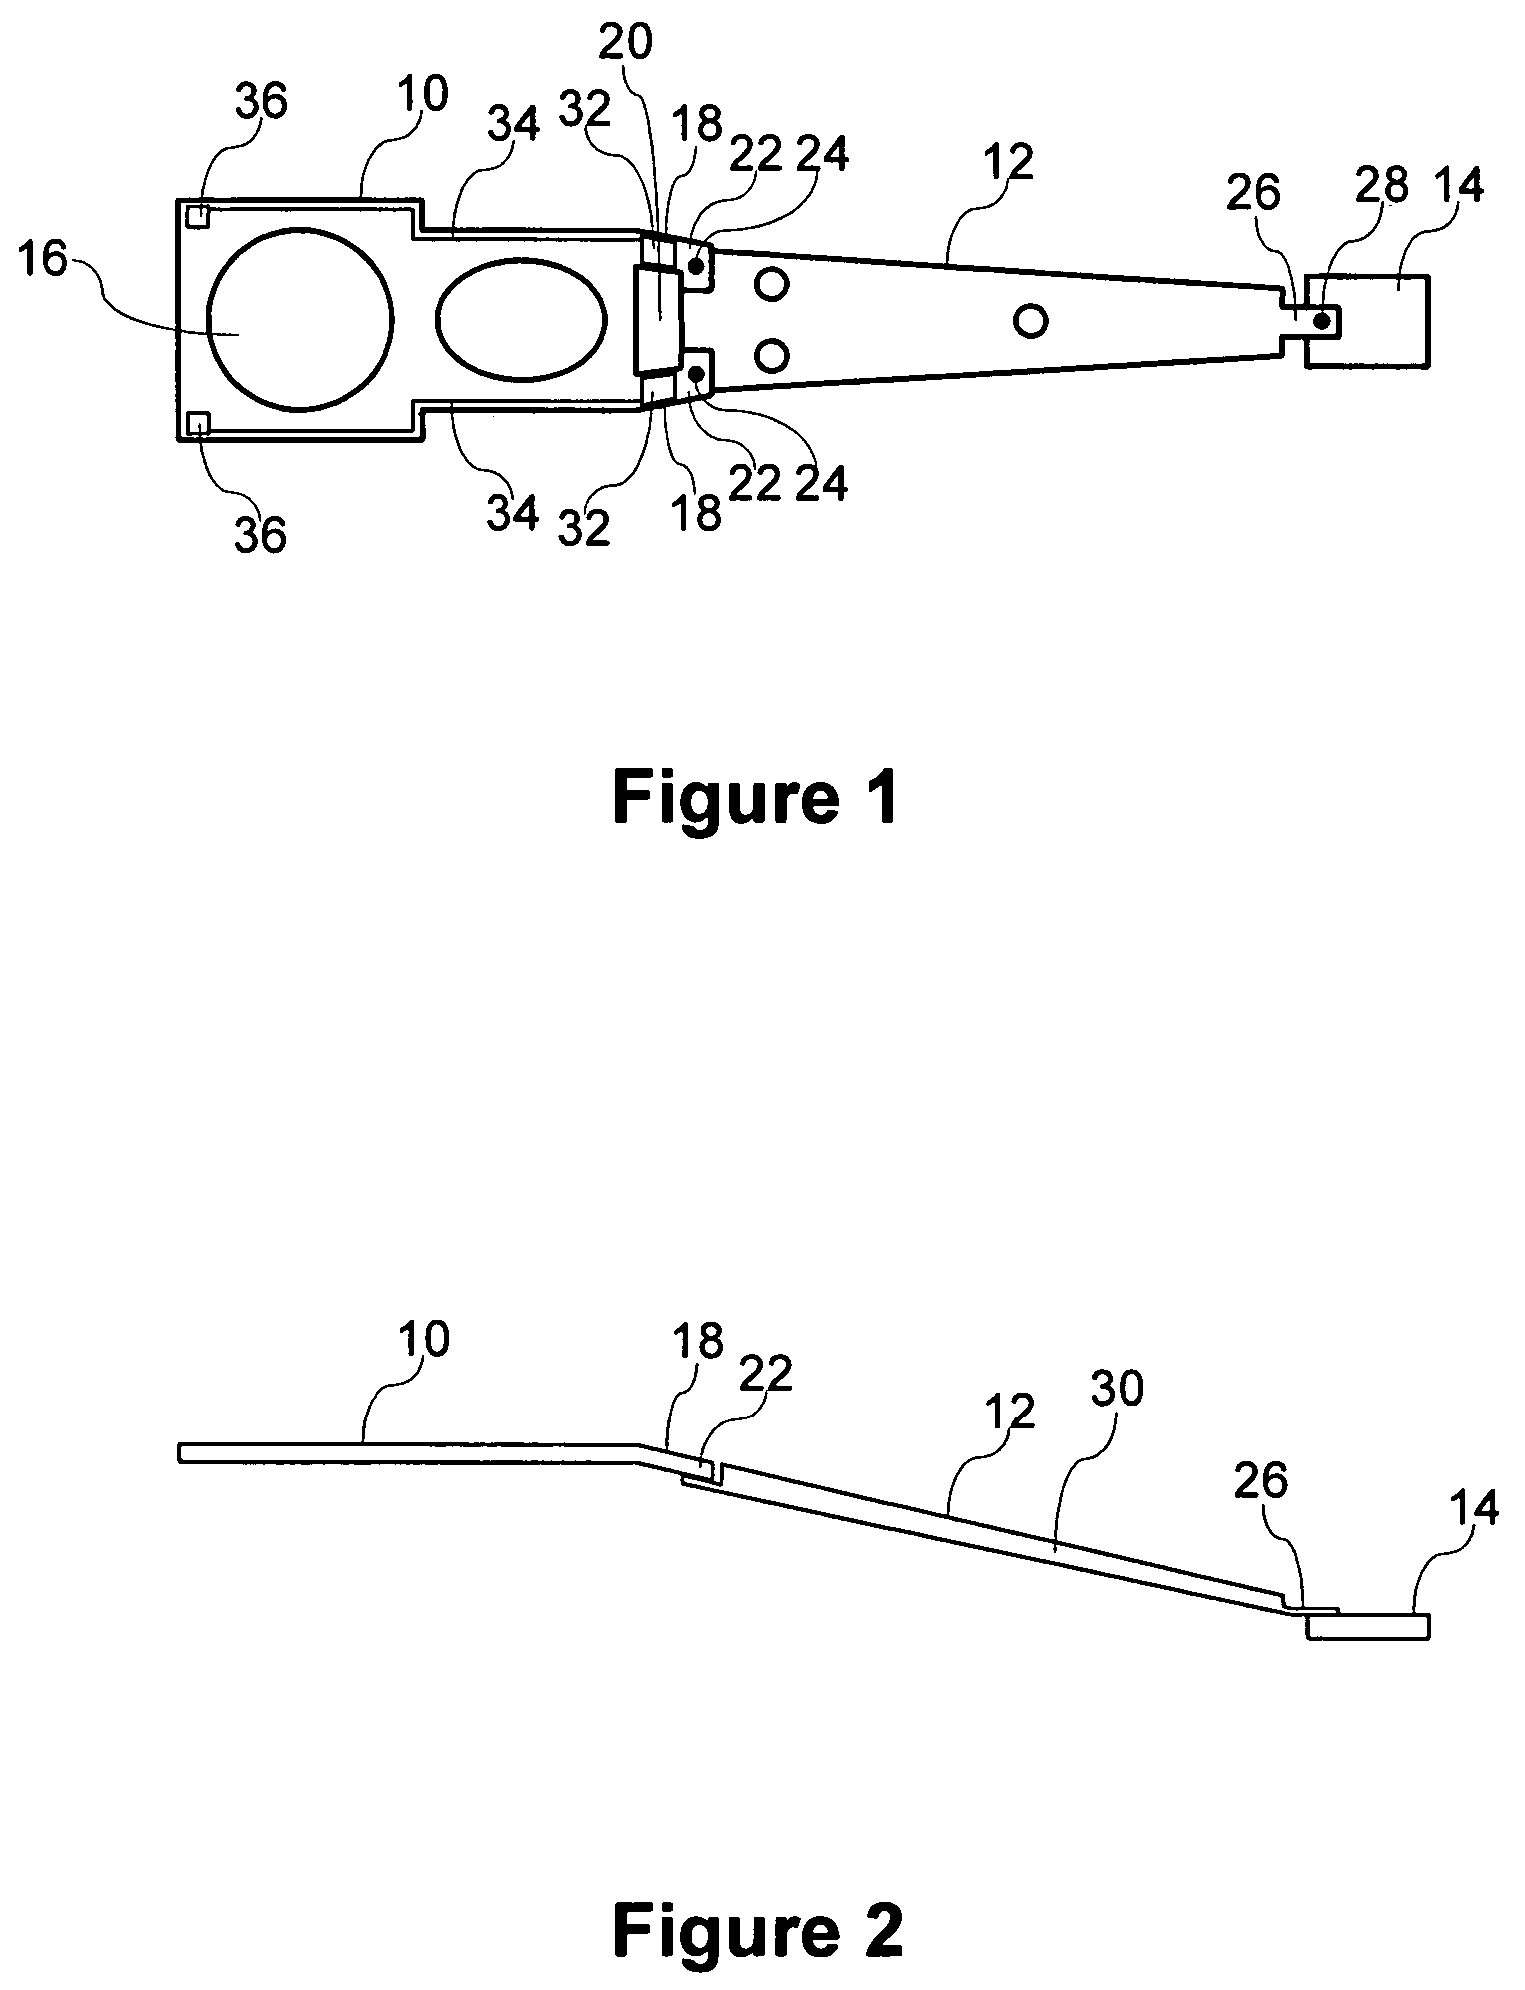 Disk drive load arm structure having a strain sensor and method of its fabrication